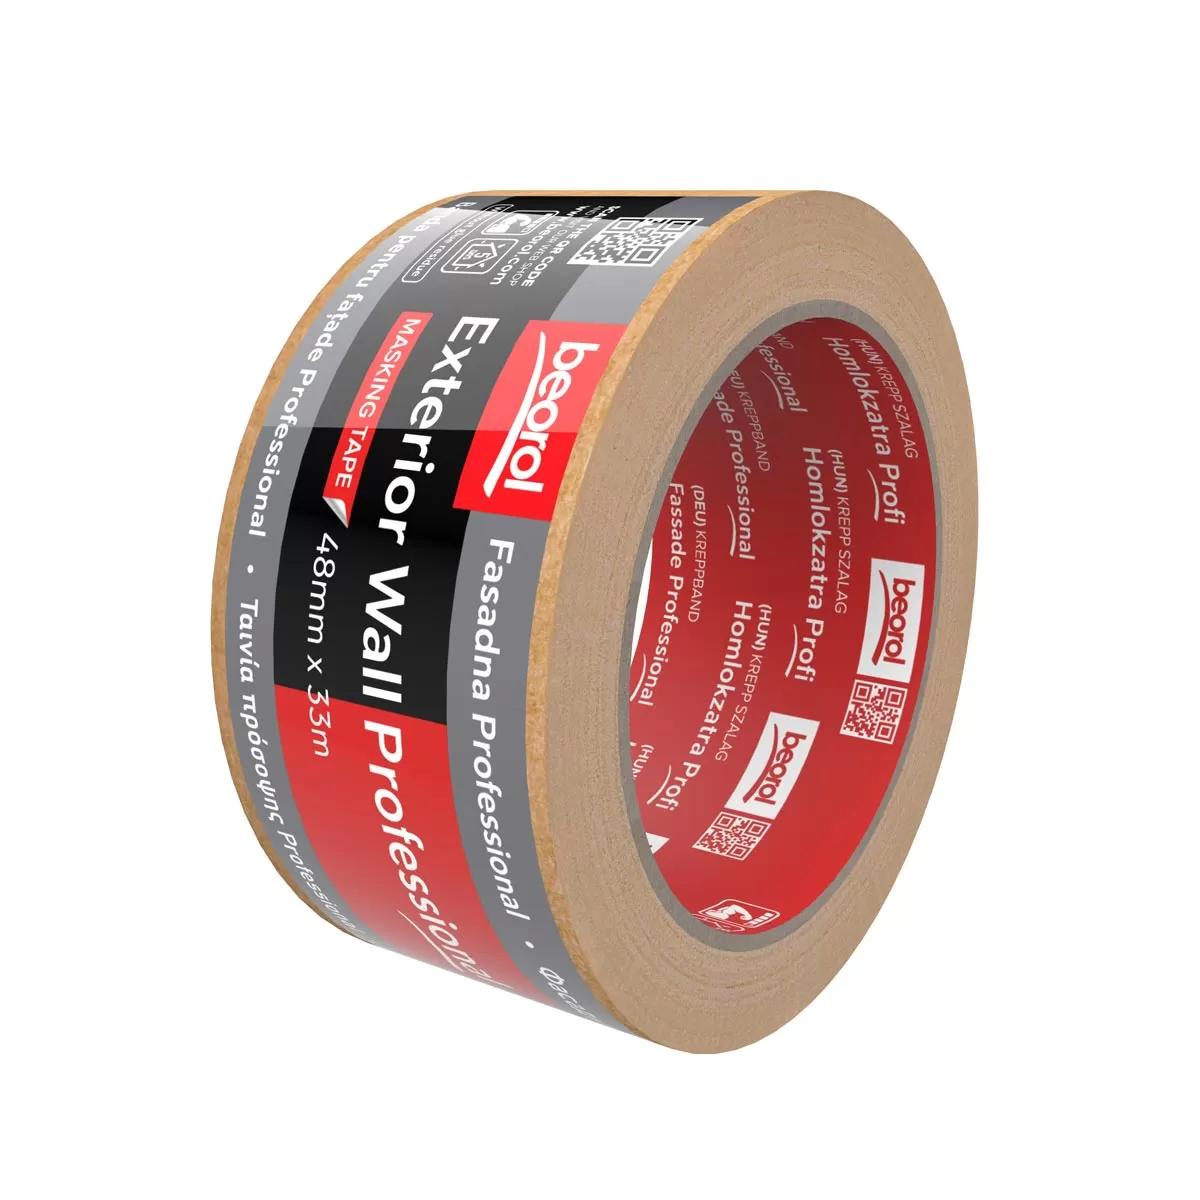 Masking tape Exterior Wall Professional 48mm x 33m 